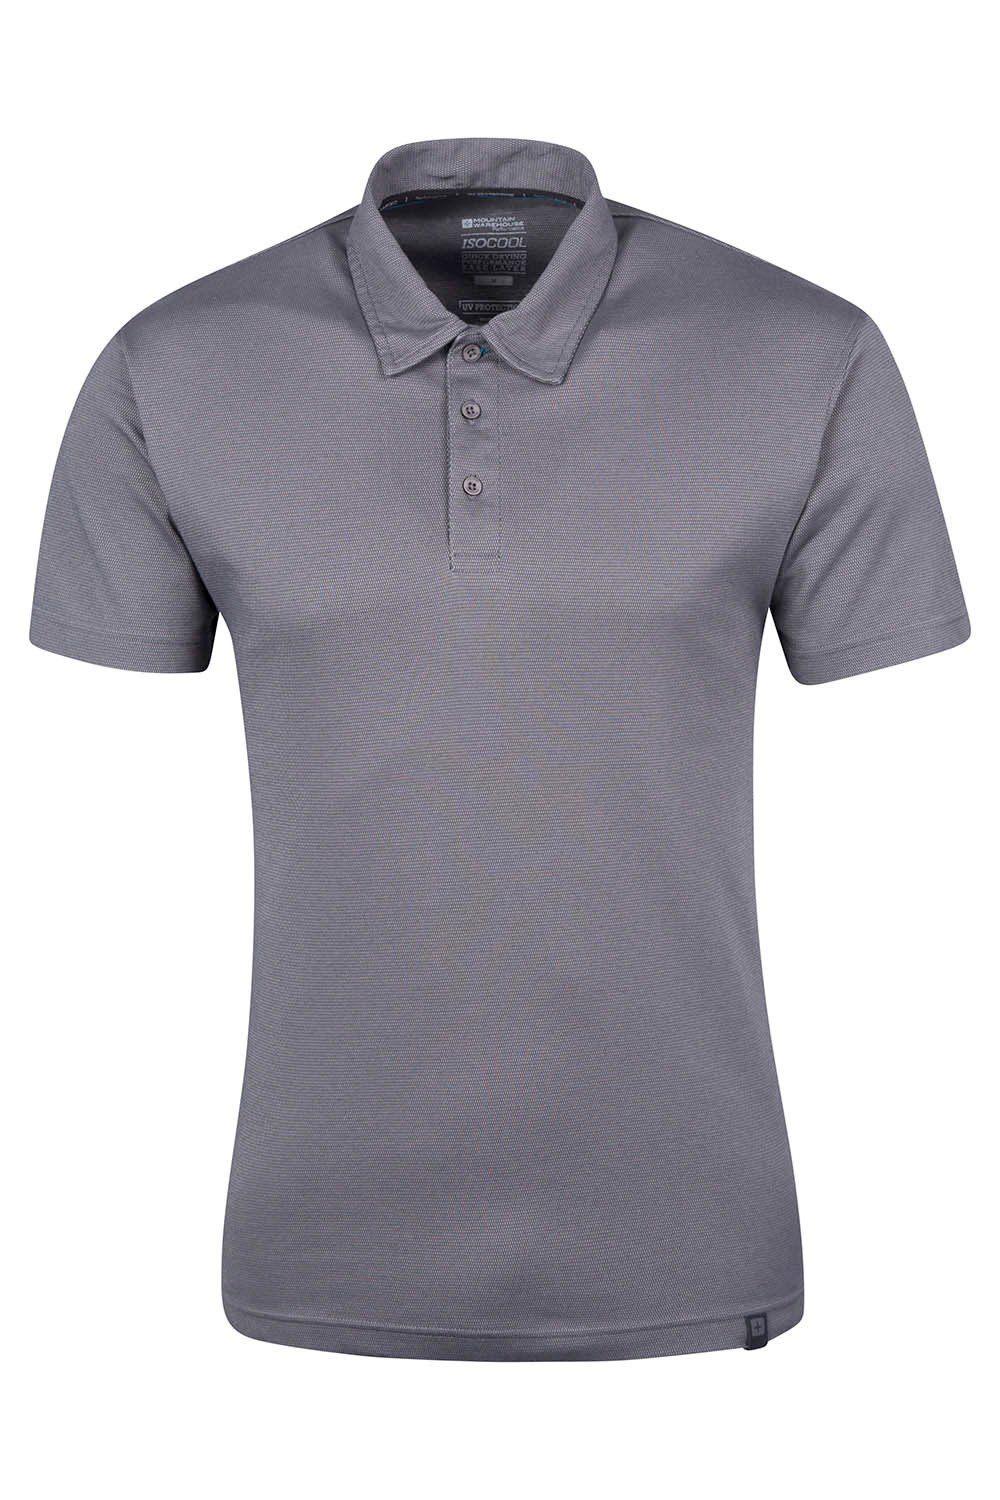 Mountain Warehouse Mens Polos 92% Polyester and 8% Elastane with ...